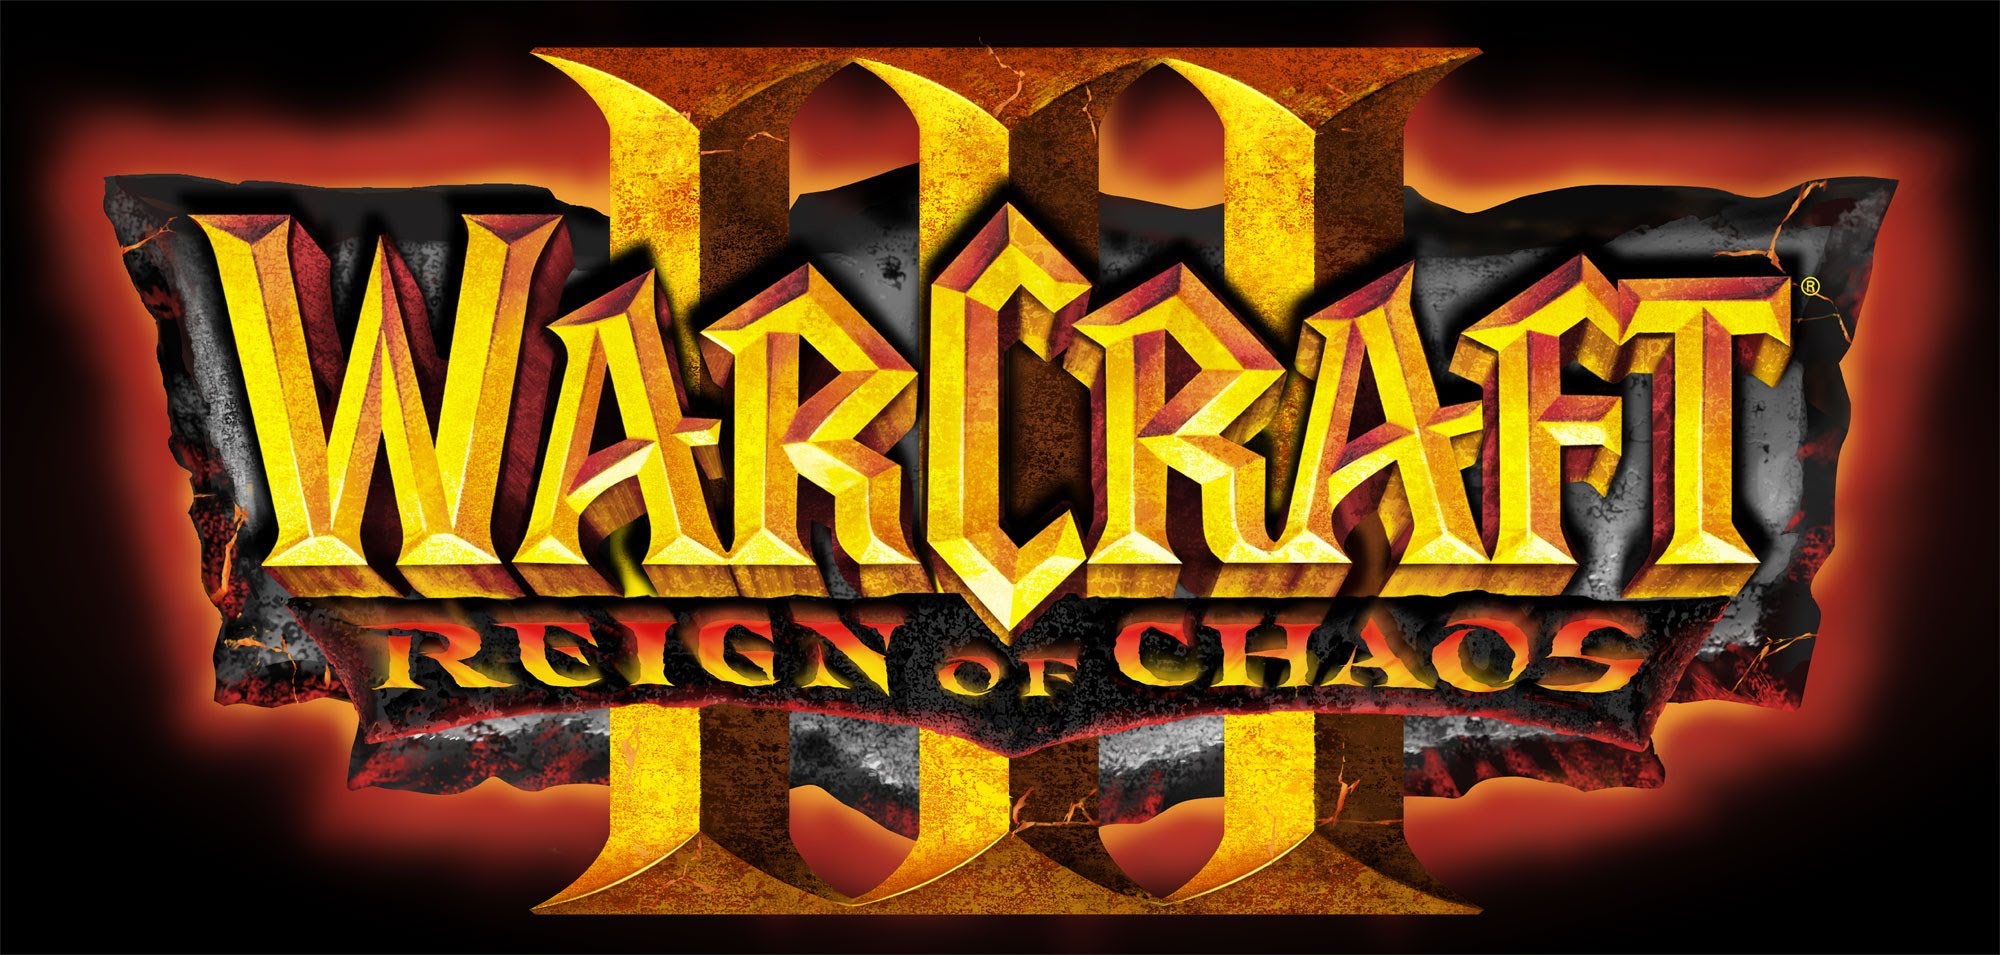 Warcraft 3 reign of chaos torrent iso ps2